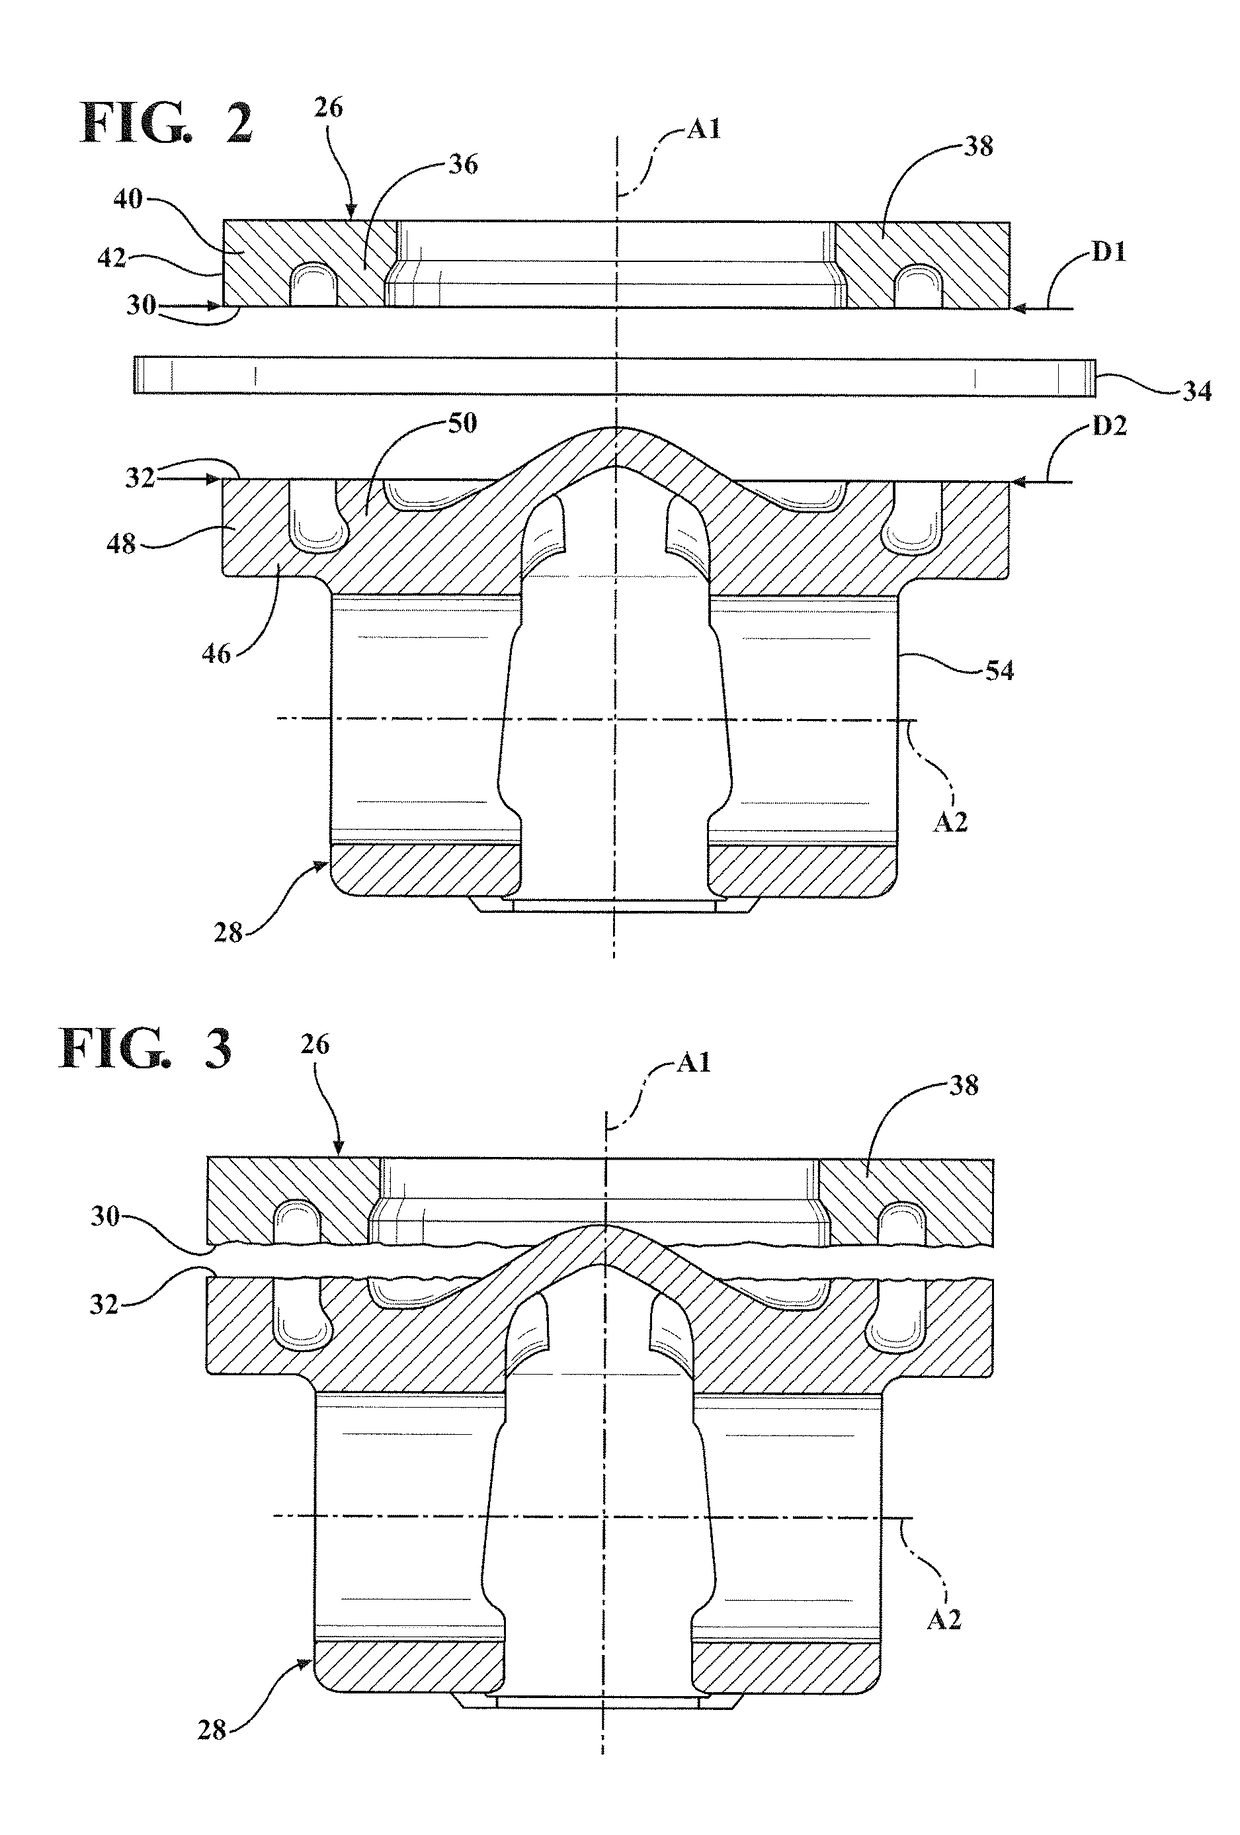 Hybrid induction welding process applied to piston manufacturing